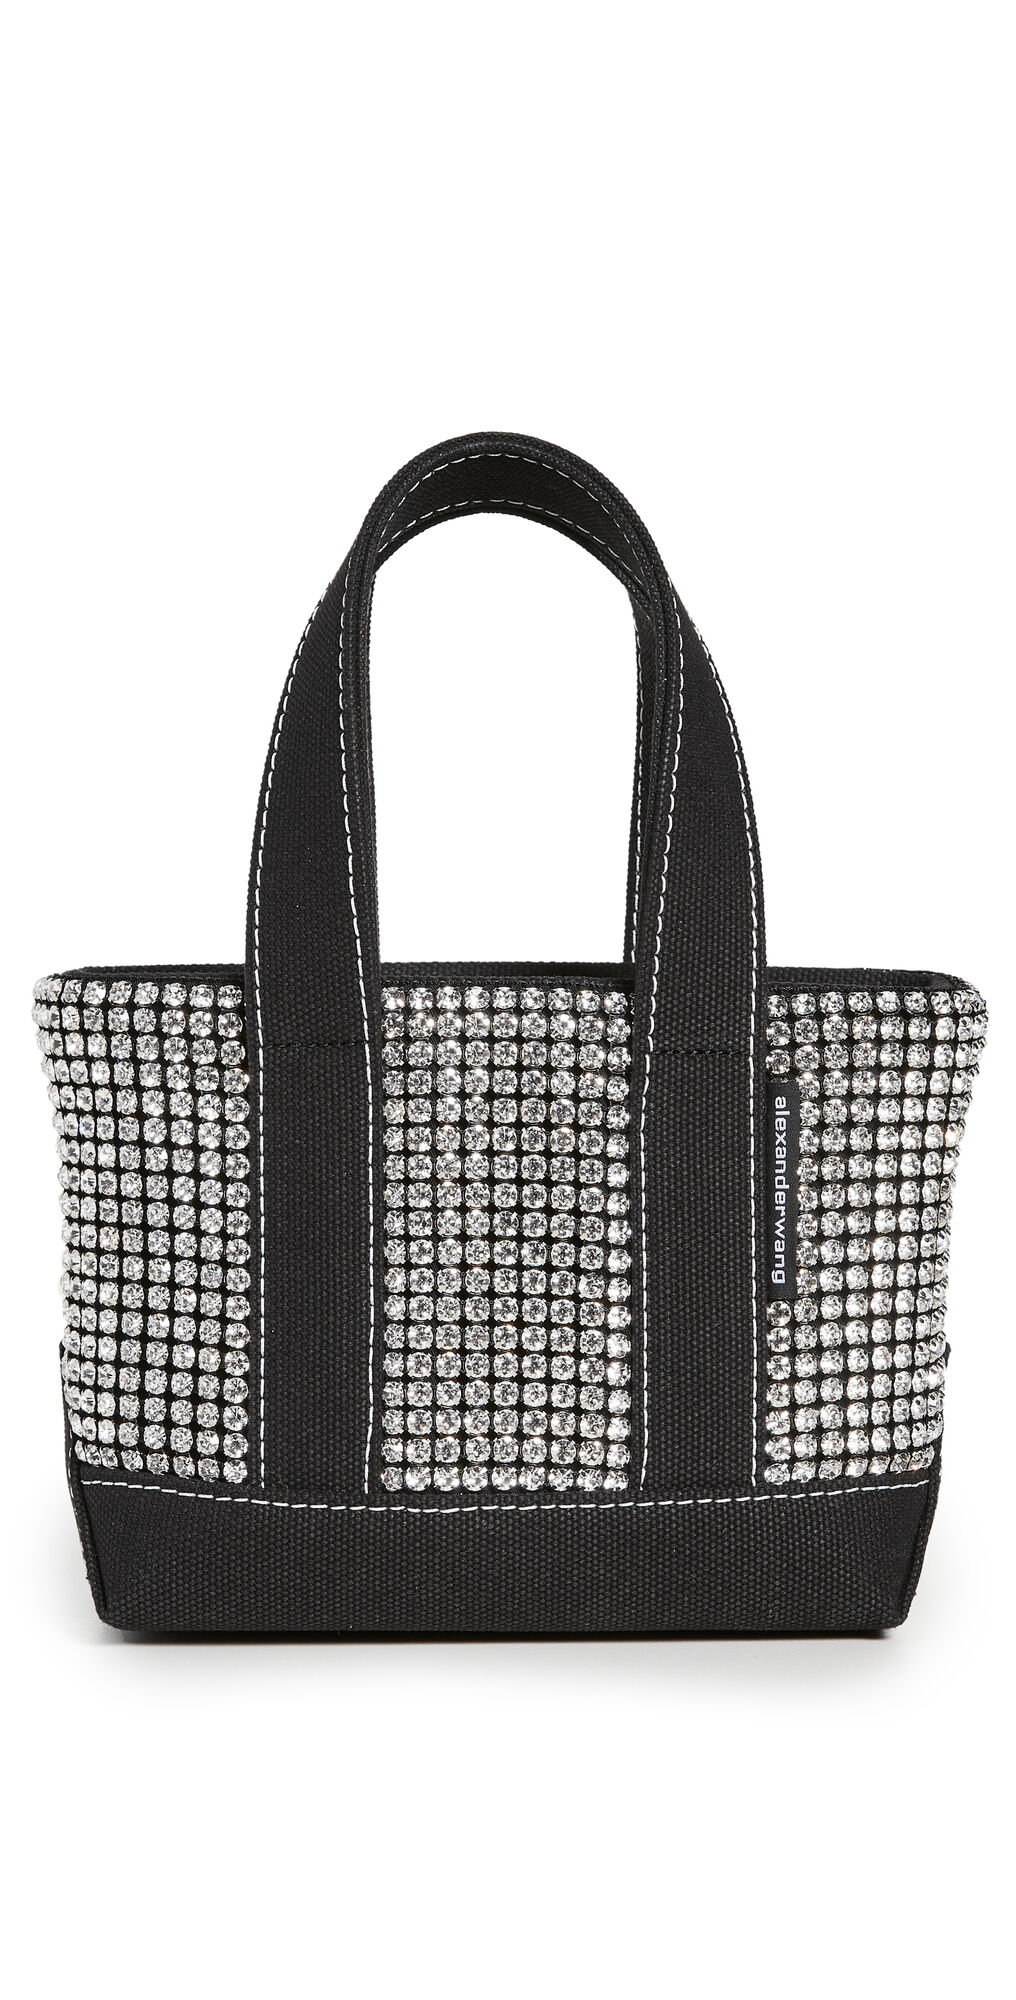 Alexander Wang Cruiser Tote Black One Size  Black  size:One Size